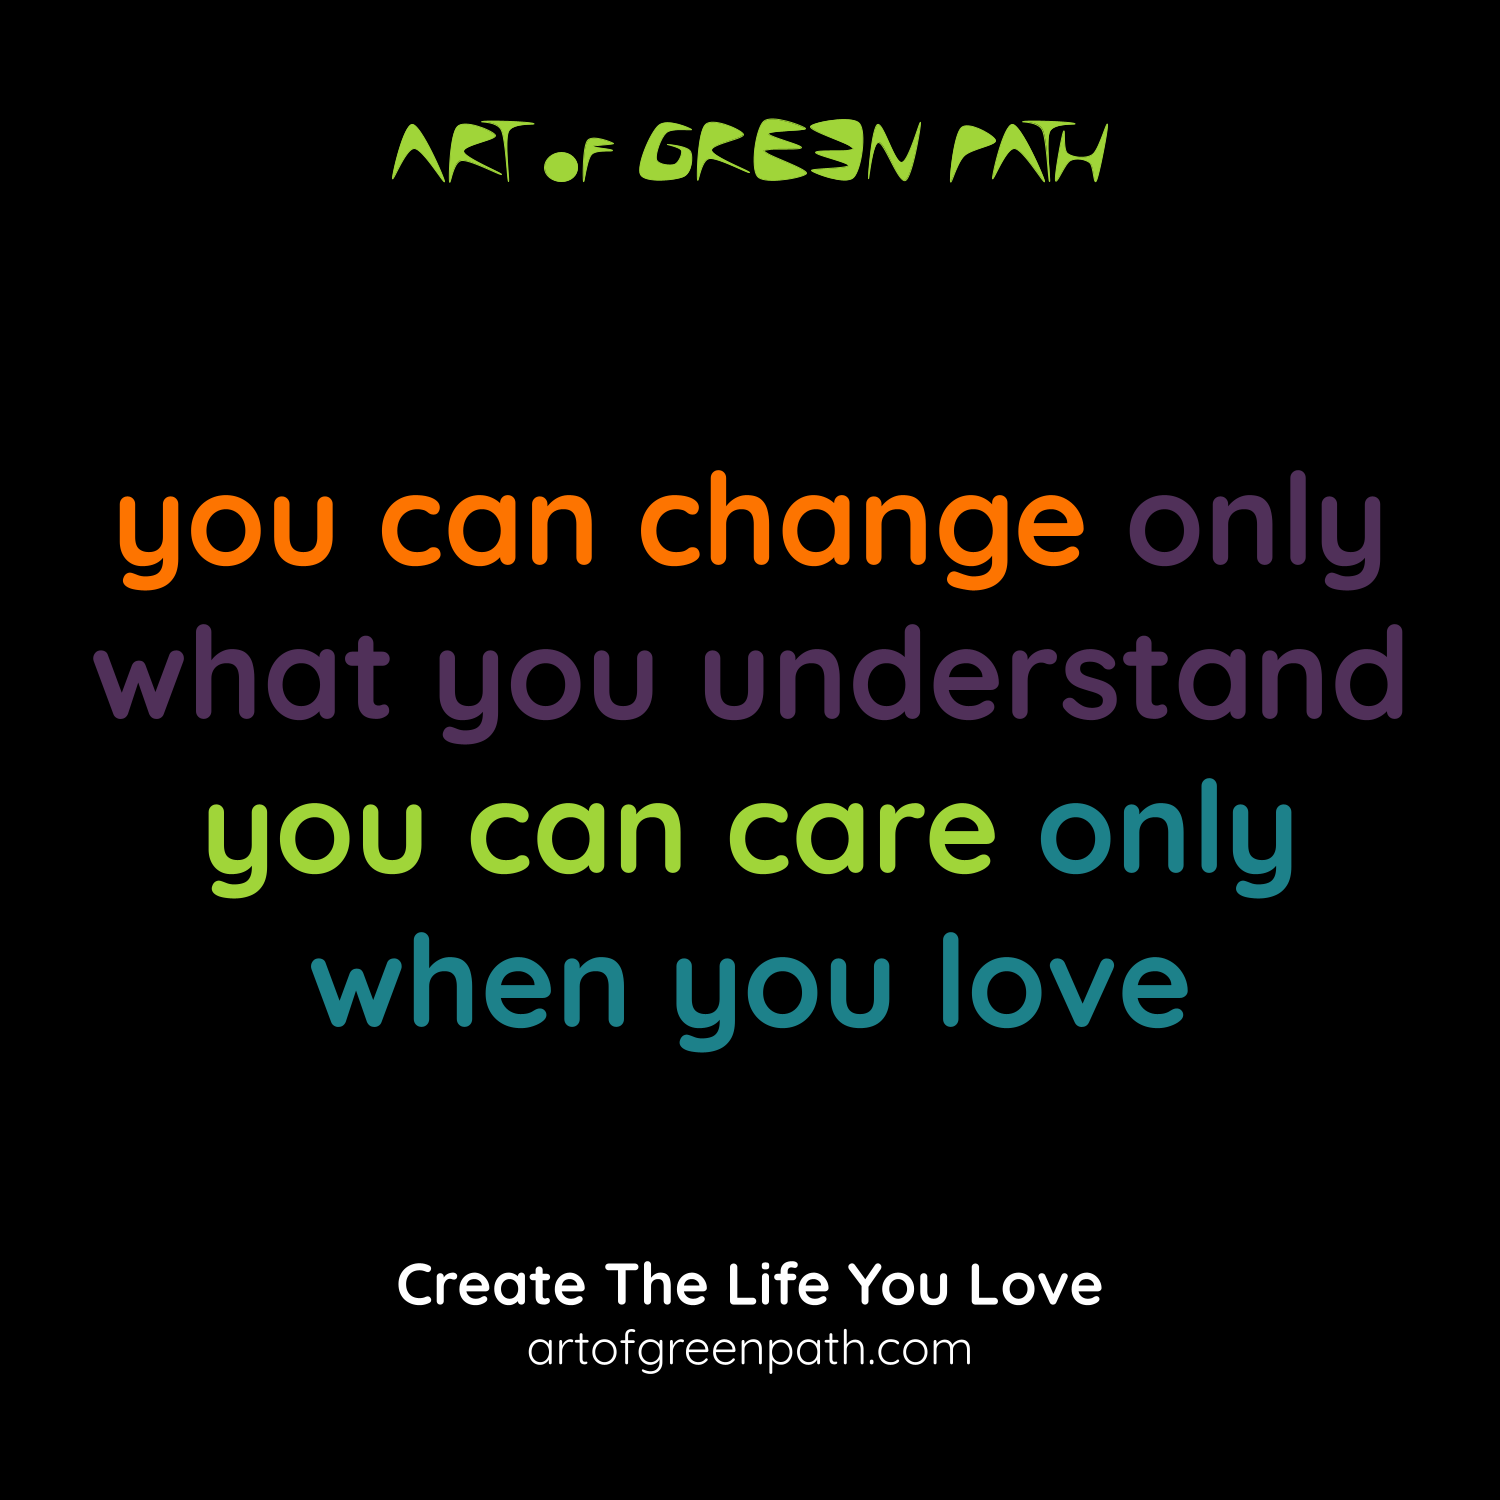 Art Of Green Path - Create The Life You Love